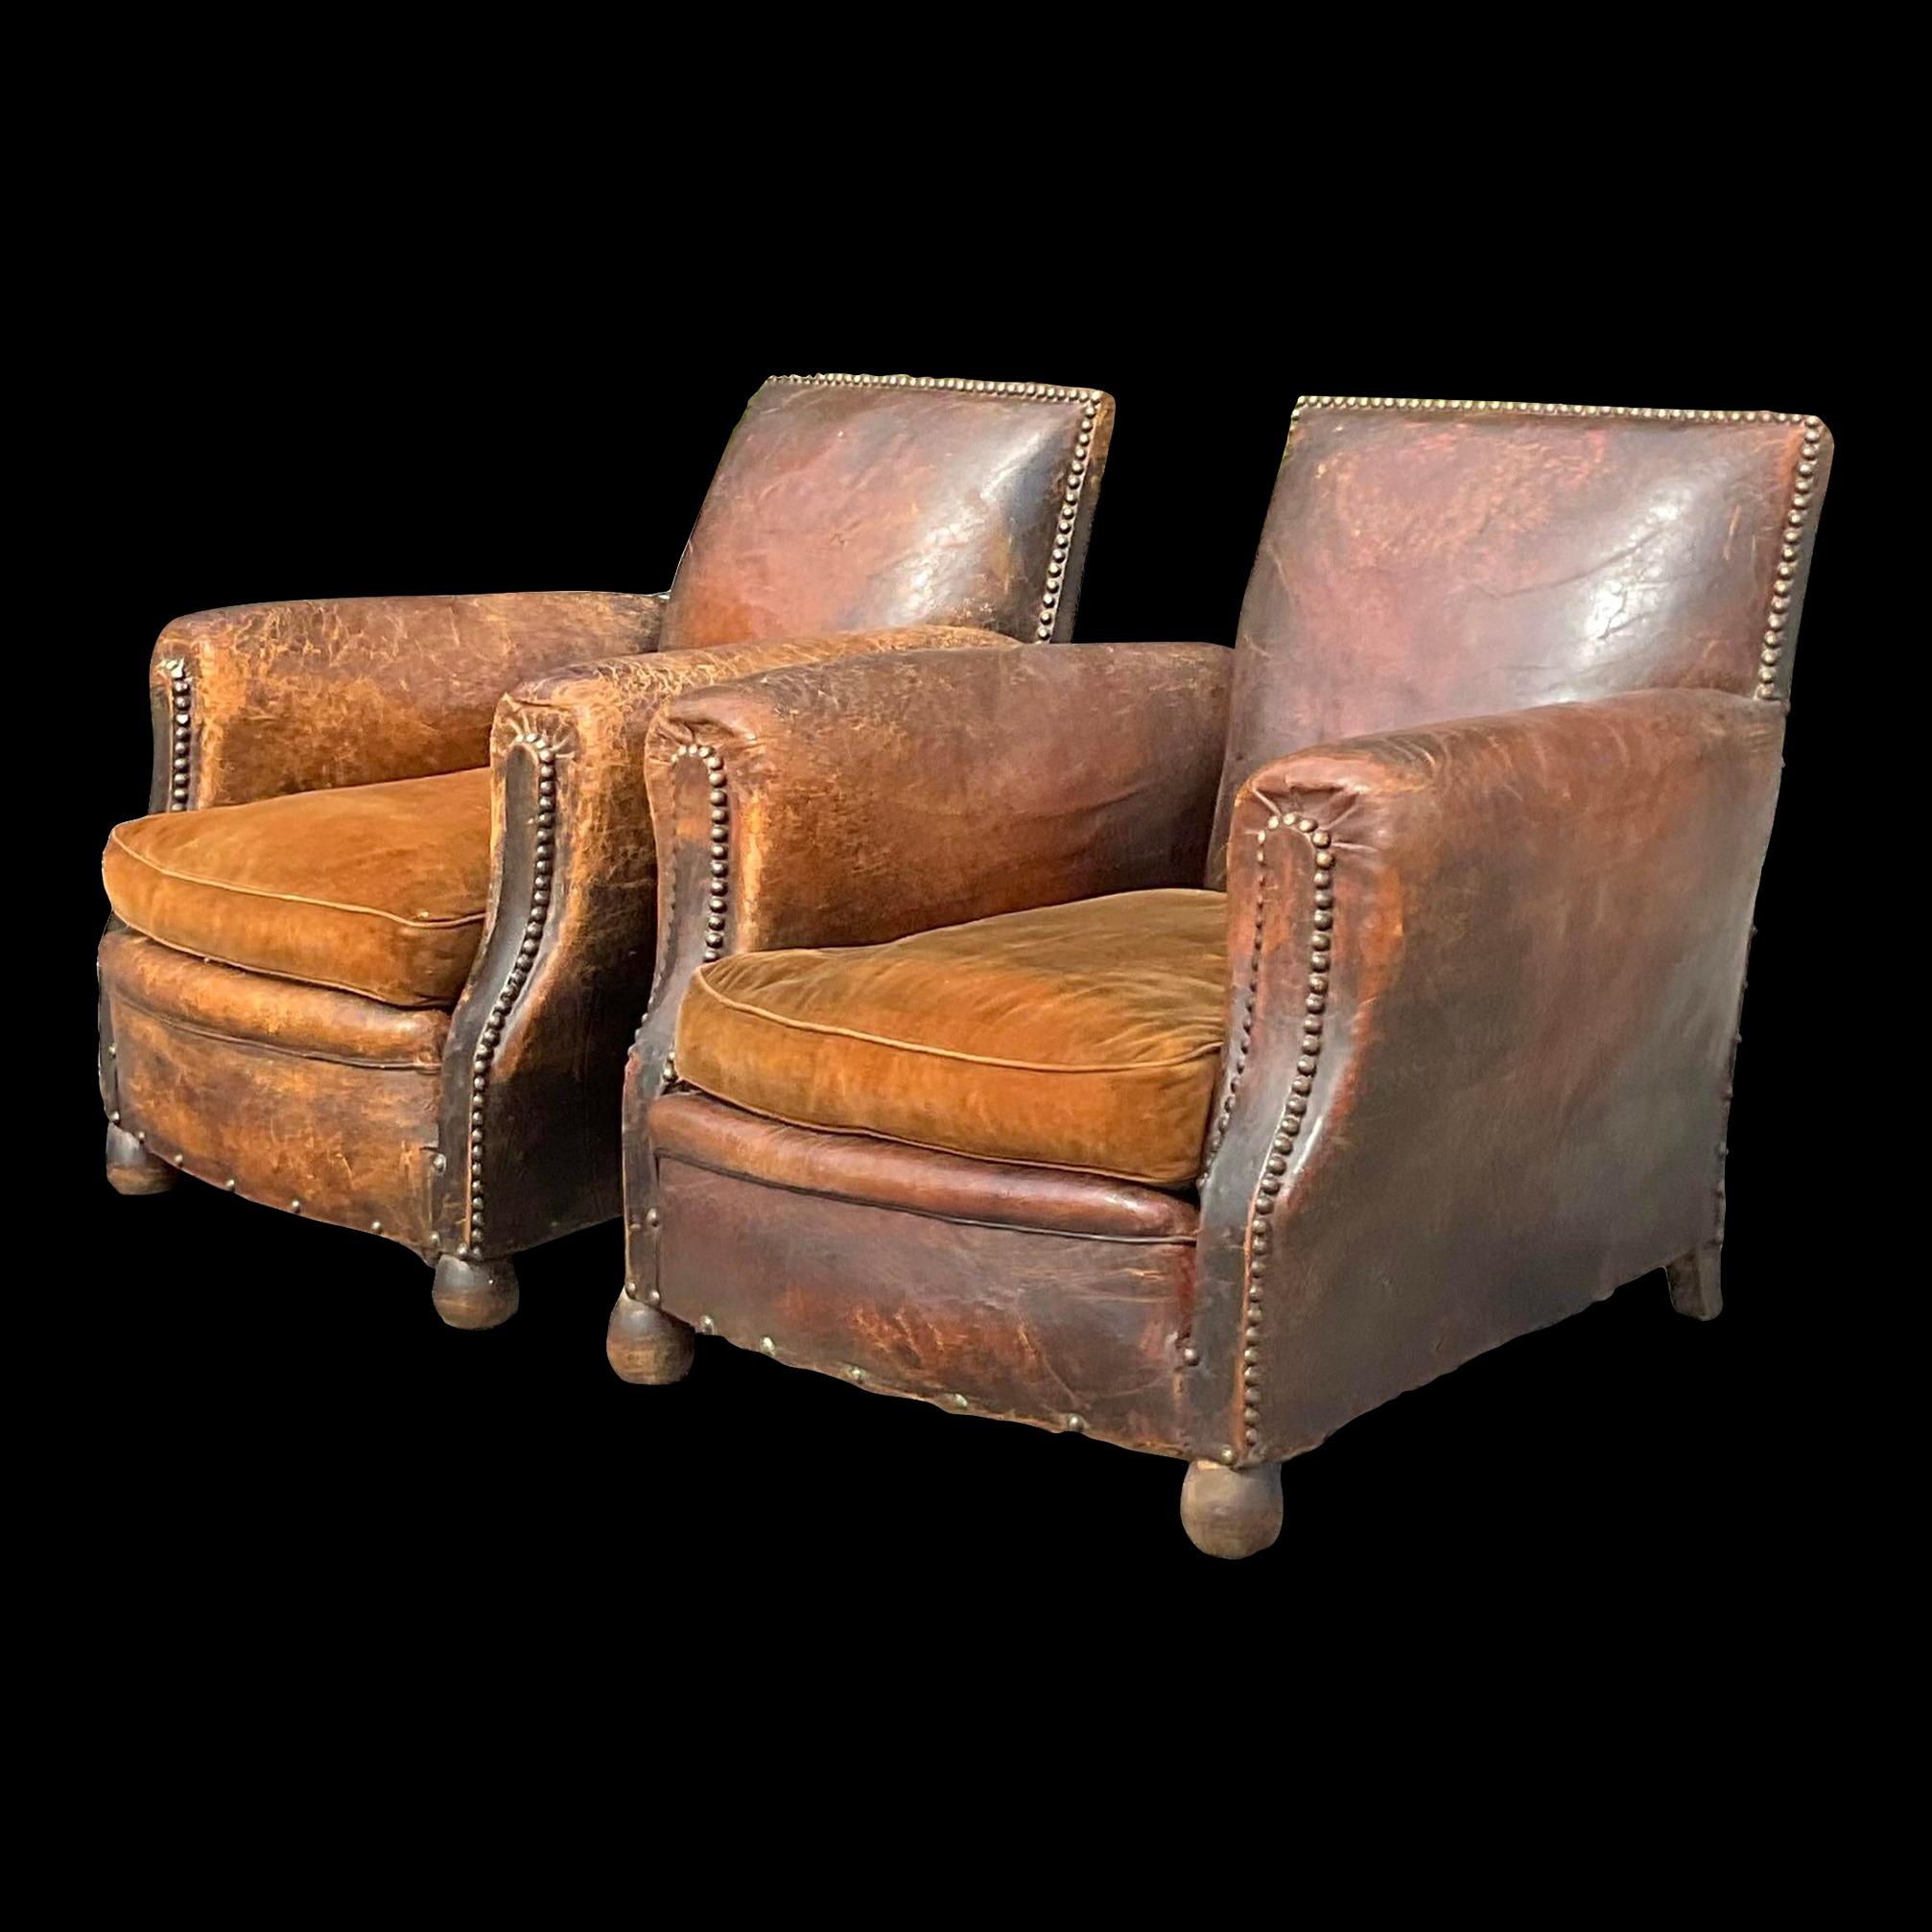 Vintage Boho Distressed French Art Deco Leather Club Chairs - a Pair For Sale 8